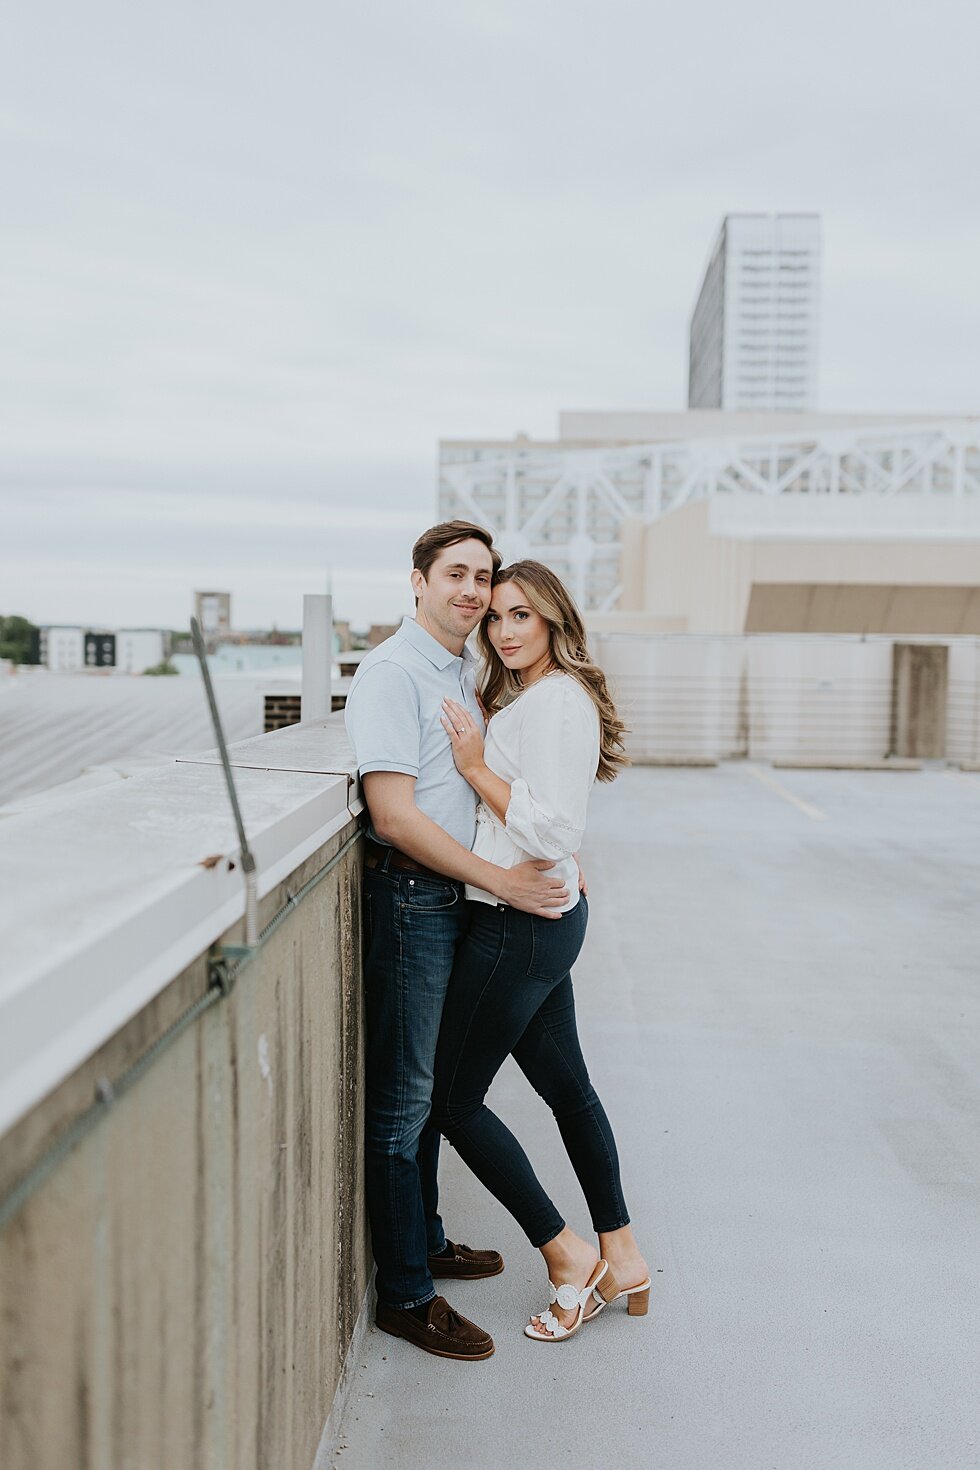  Rooftop engagement session in Louisville, Kentucky. getting married outdoor session engaged couple together wedding preparation love excited stunning relationship #engagementphotos #midwestphotographer #kywedding #louisville #rooftop #stjamescourt #